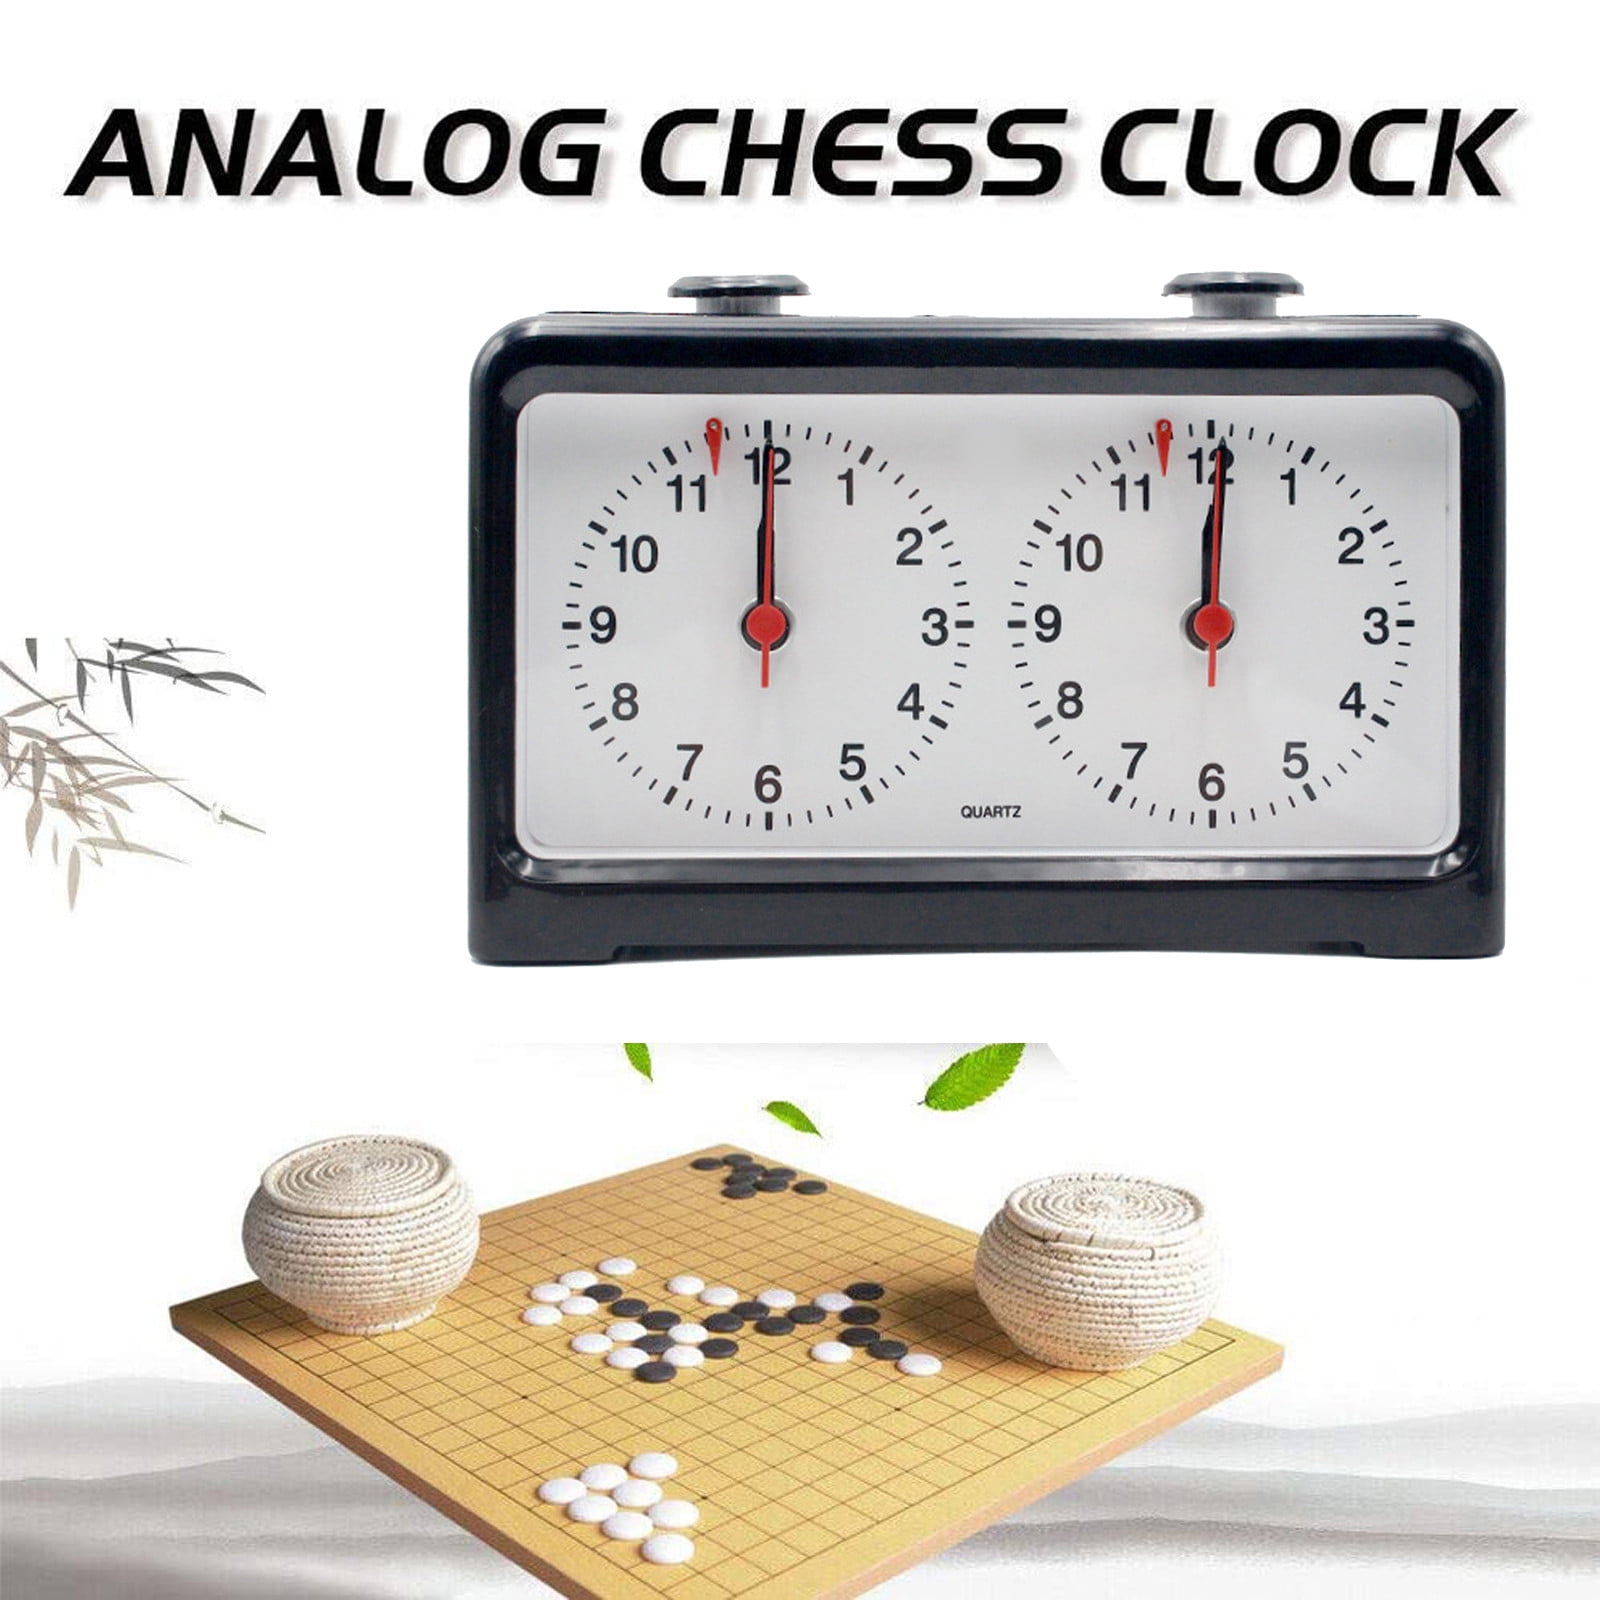 PQ9905 Quarz Analog Chess Clock I-go Count Up Down Timer Game Competition device 